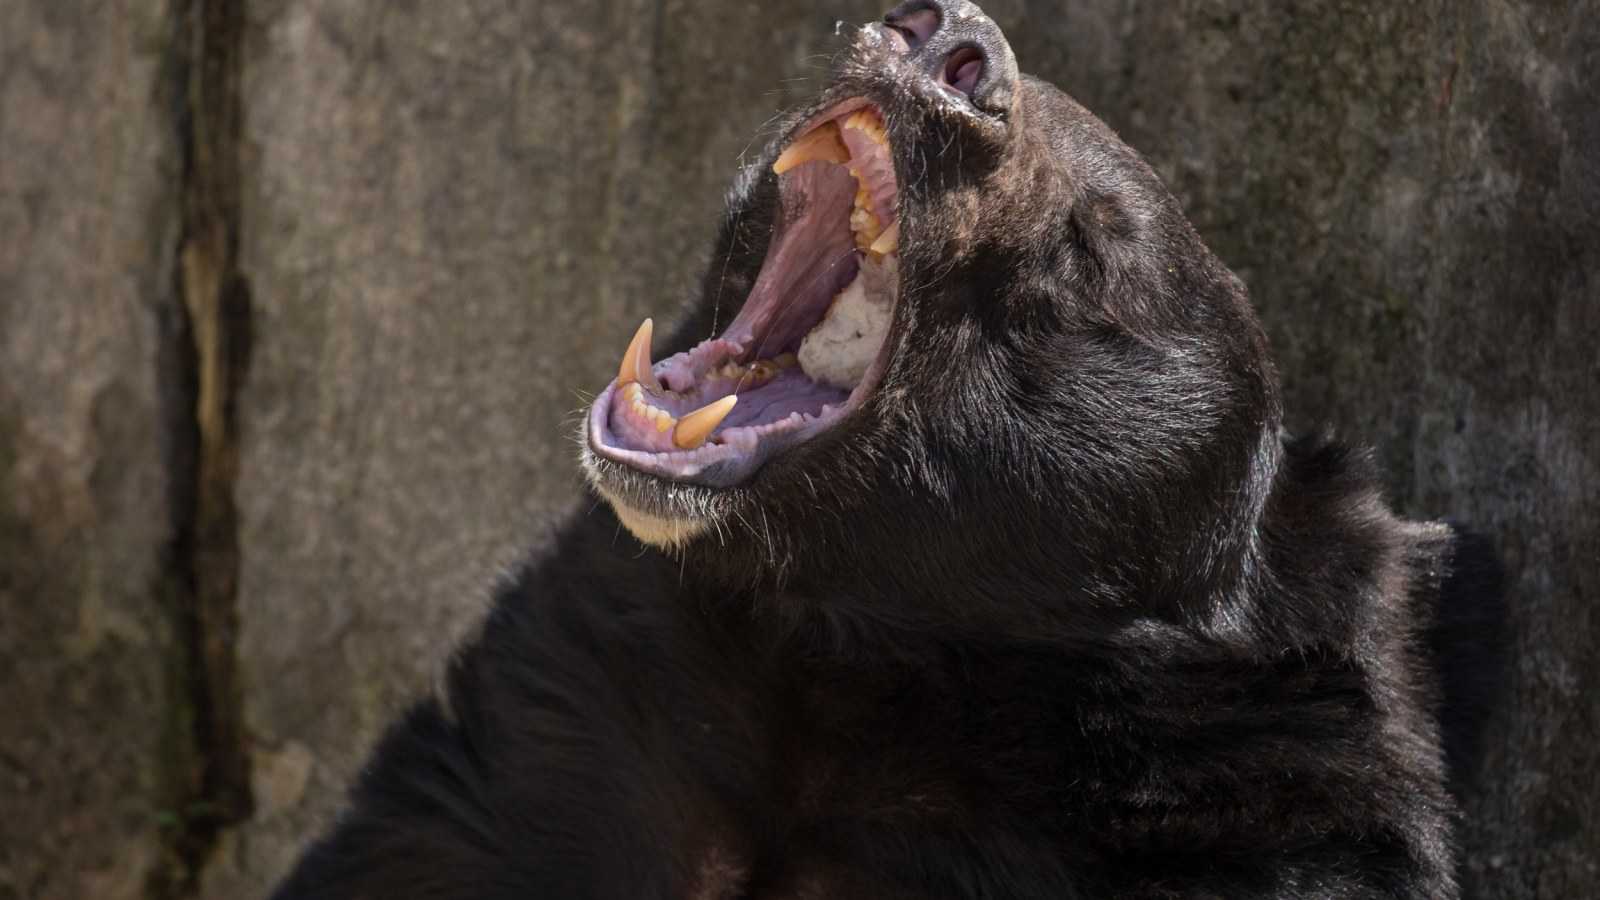 Chewed Her up Bad': Bear Hunted Down Woman in Rare Predatory Attack